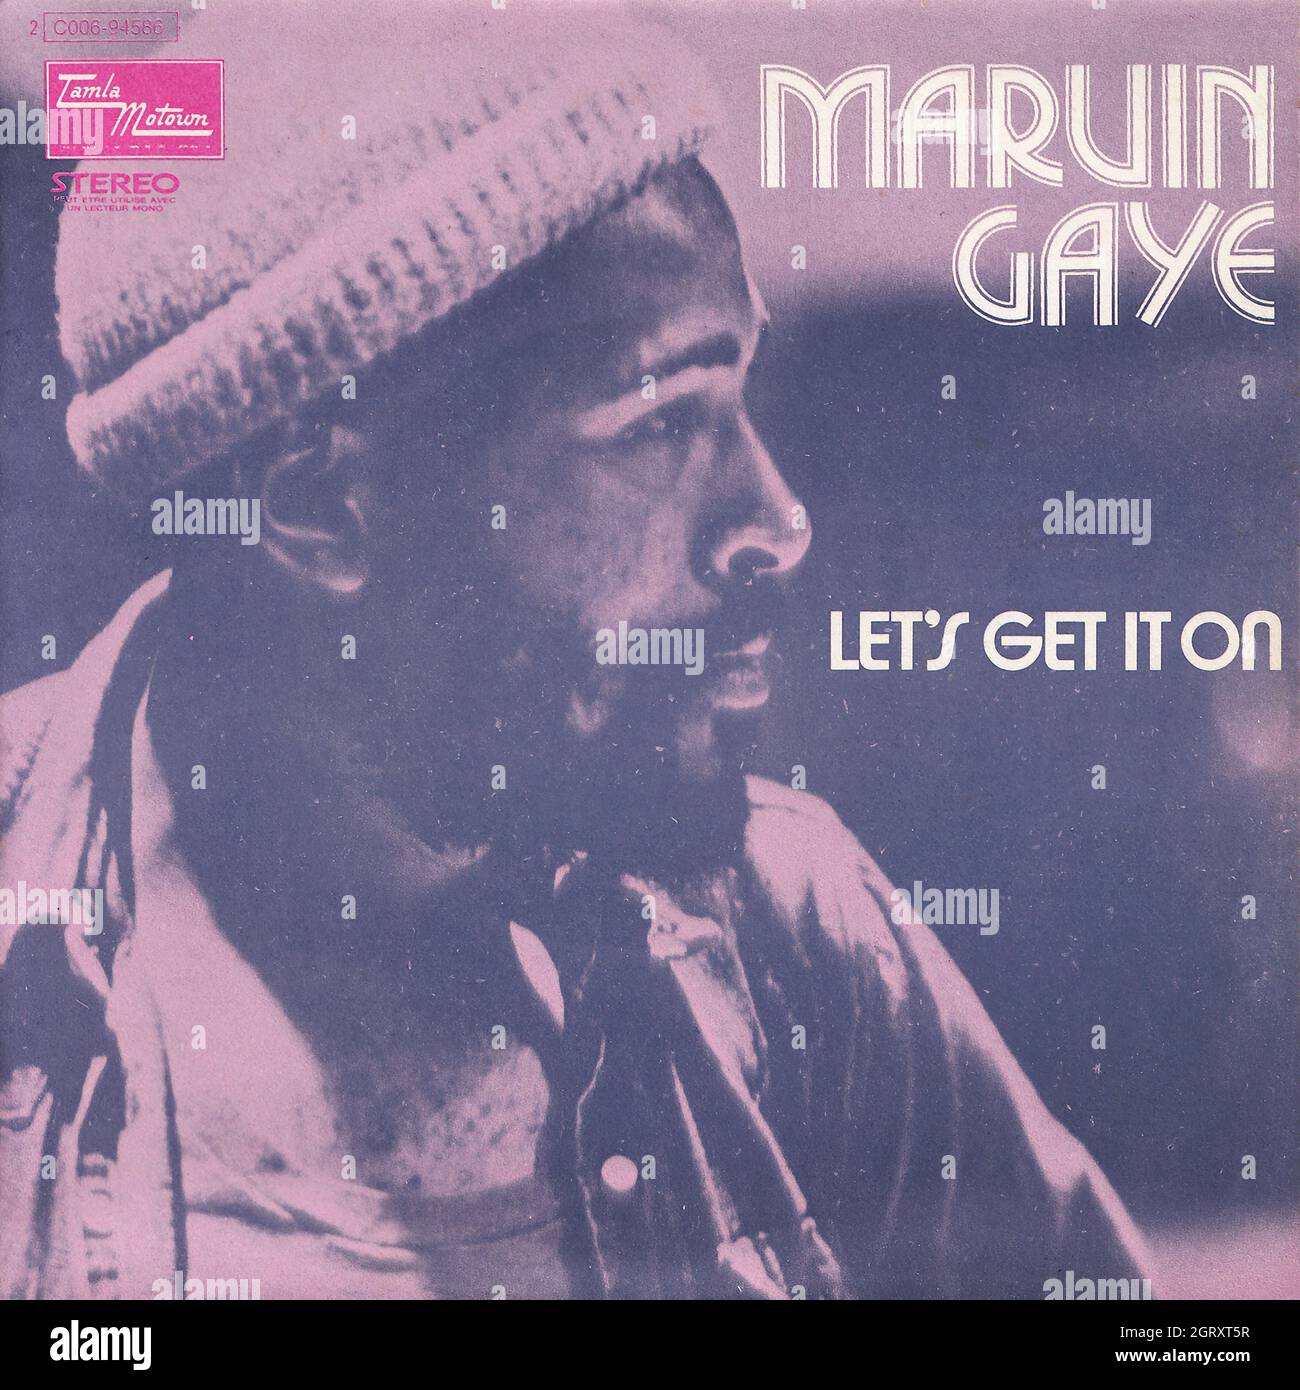 Marvin Gaye - Let's get it on - I wish it would rain 45rpm - Vintage Vinyl Record Cover Stock Photo